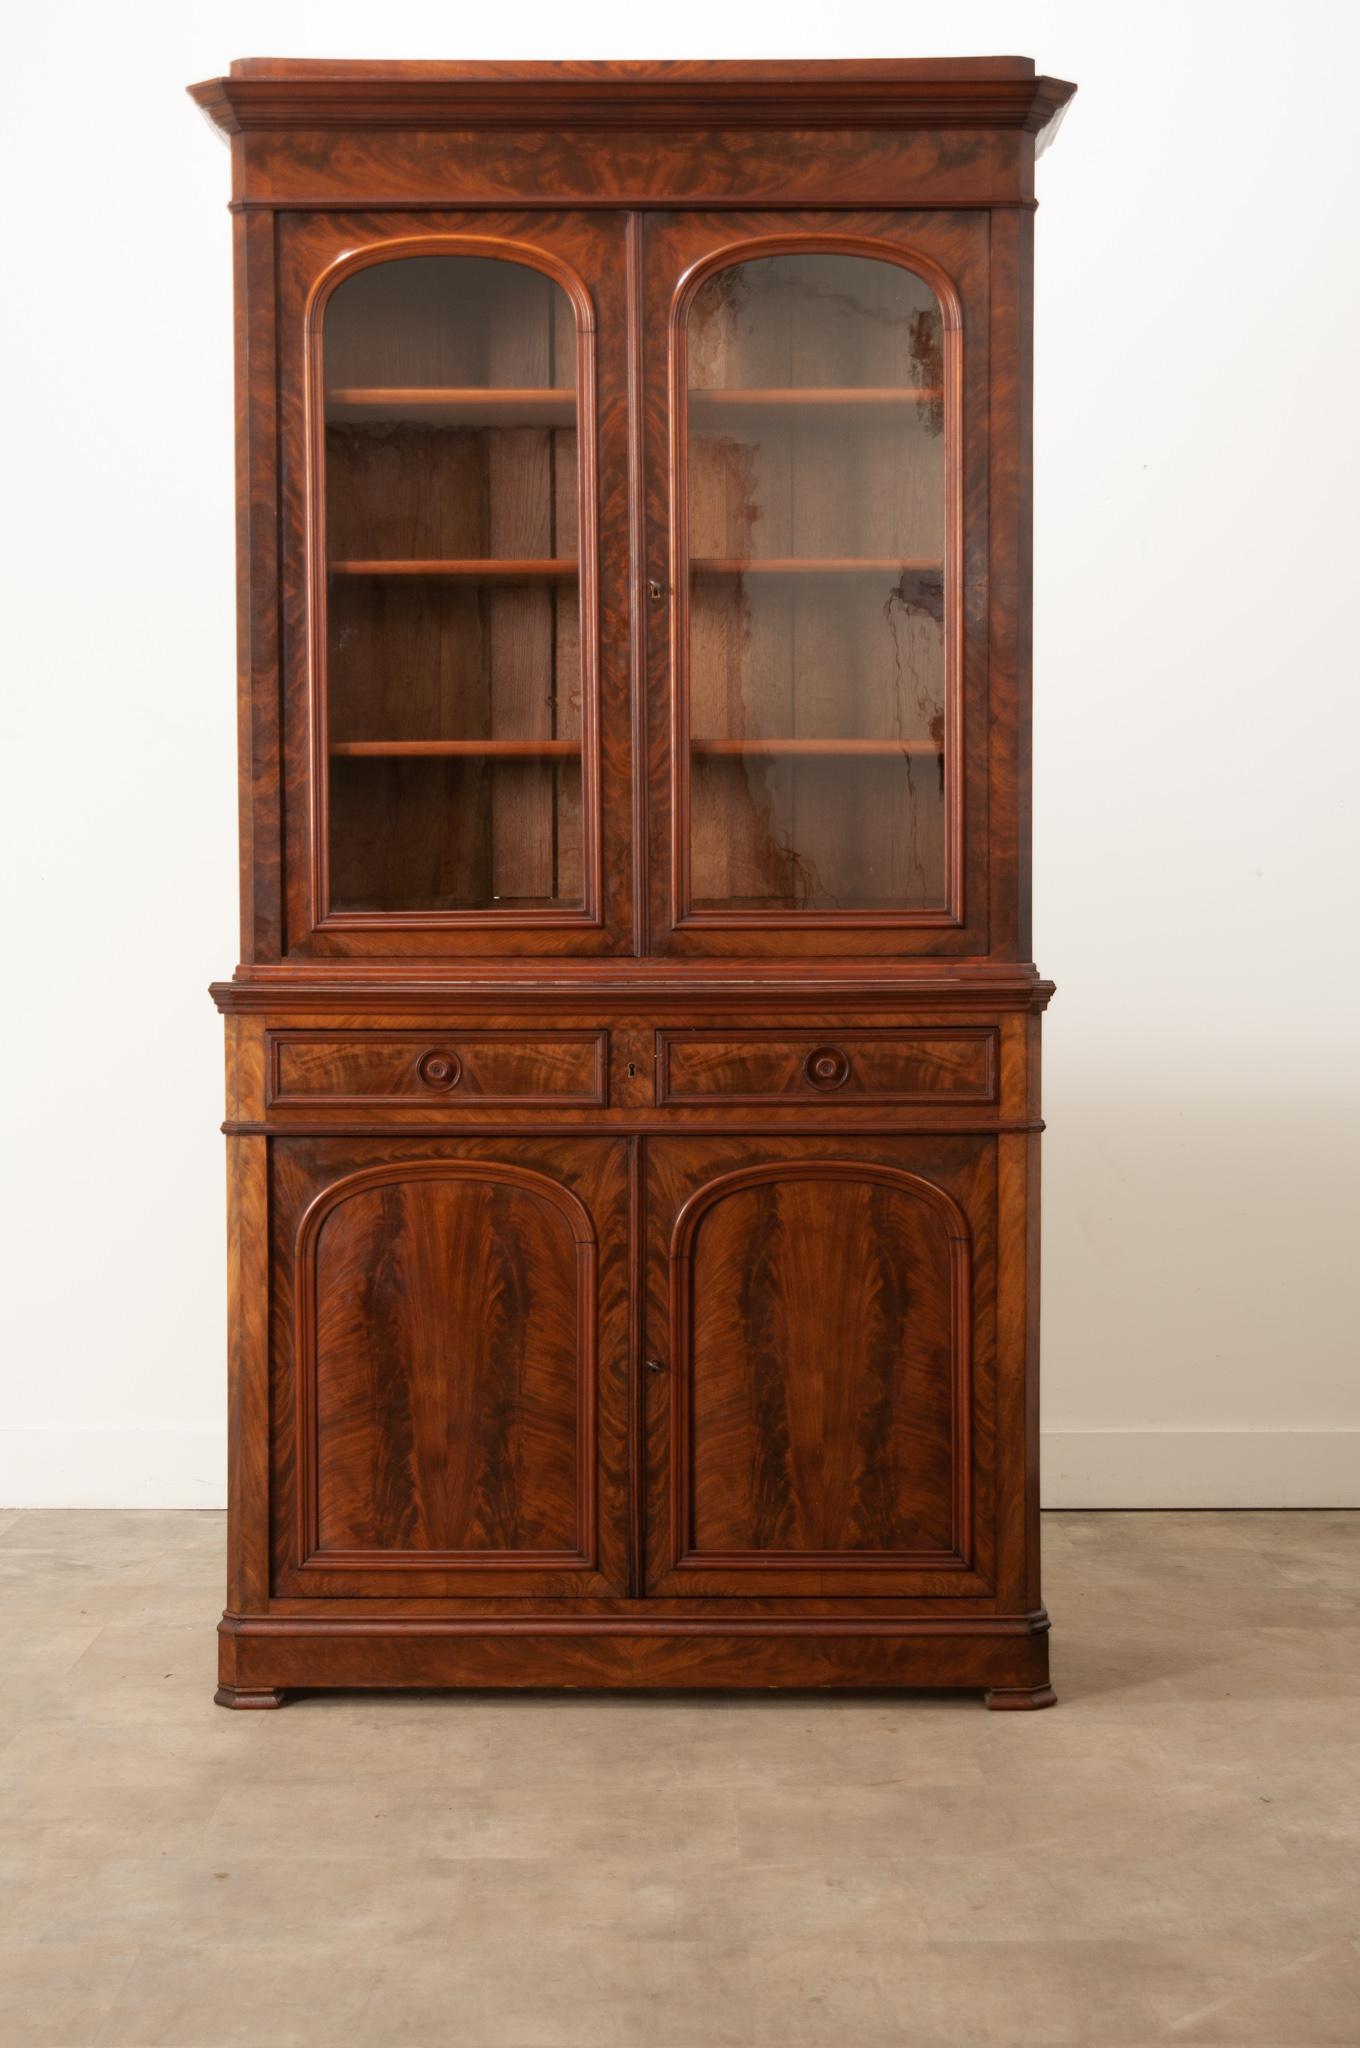 This handsome bibliotheque was crafted in the style of Louis Philippe in 19th century France. Gorgeous flame patterned mahogany is well paired with deep red toned trim to create a knockout case piece. Original wavy glass in the top cabinet doors